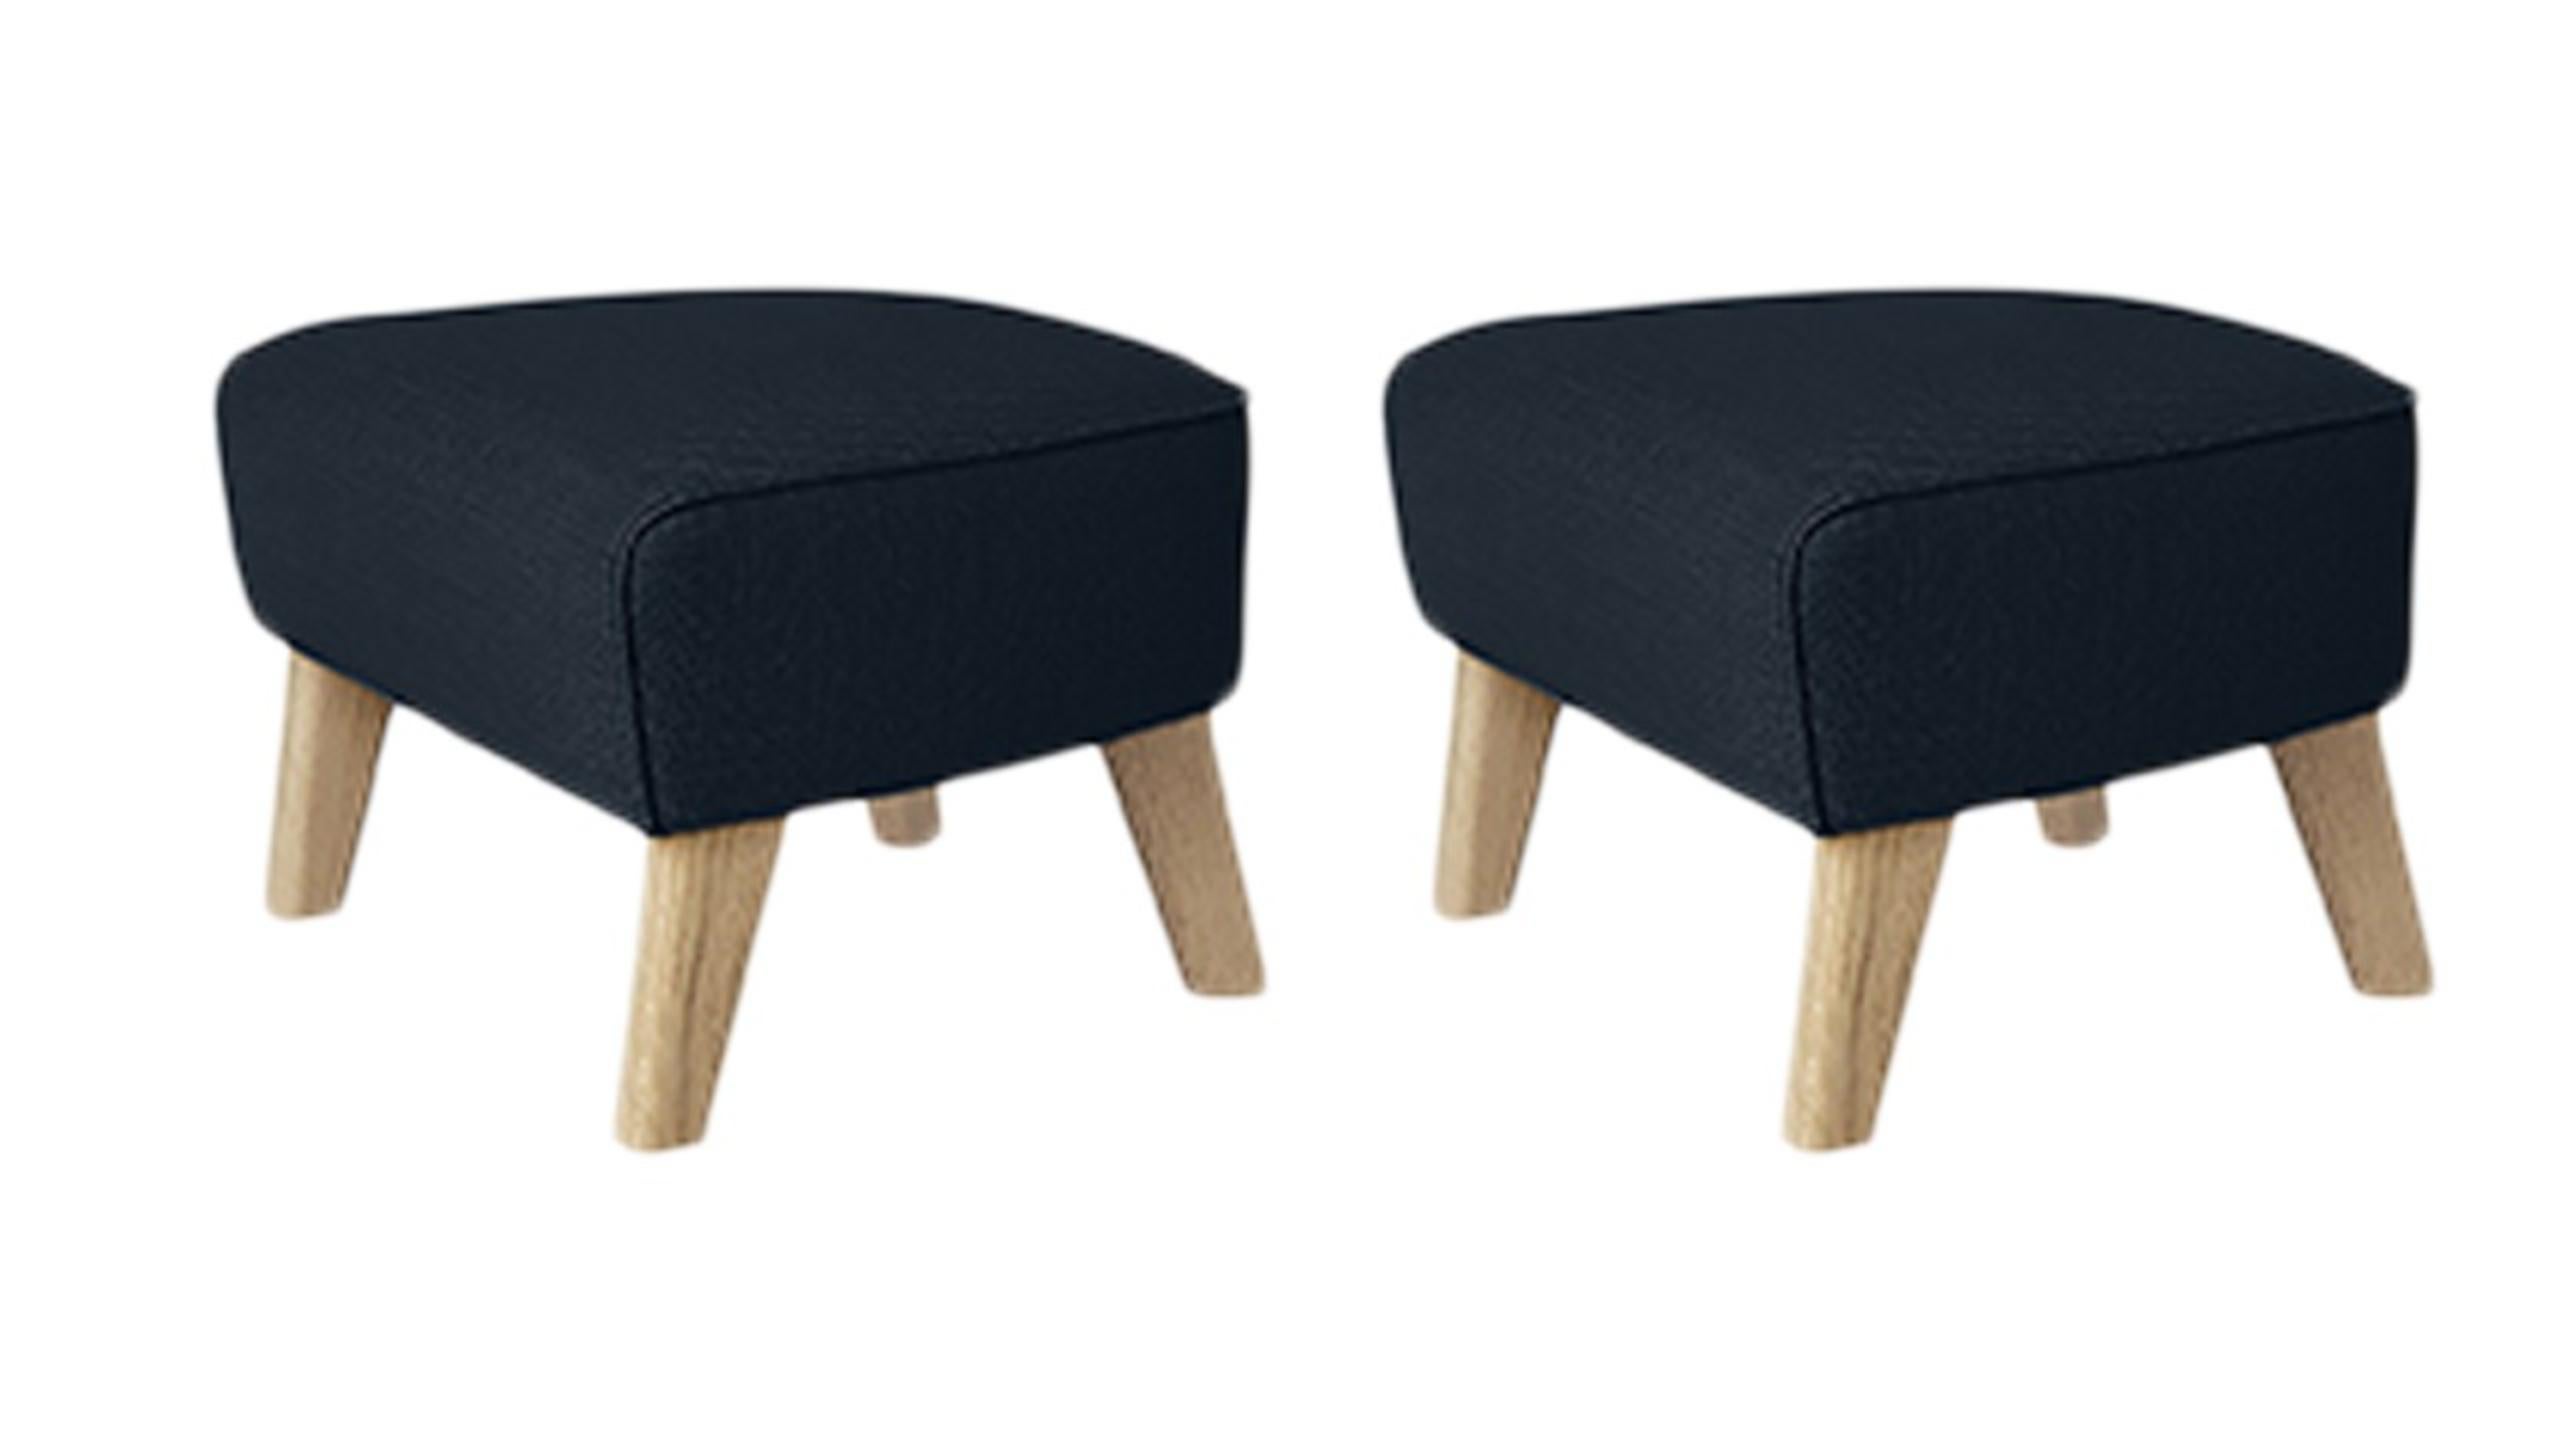 Set of 2 blue, natural oak Raf Simons Vidar 3 My Own Chair Footstools by Lassen
Dimensions: W 56 x D 58 x H 40 cm 
Materials: Textile, oak
Also available: other colors available

The My Own Chair Footstool has been designed in the same spirit